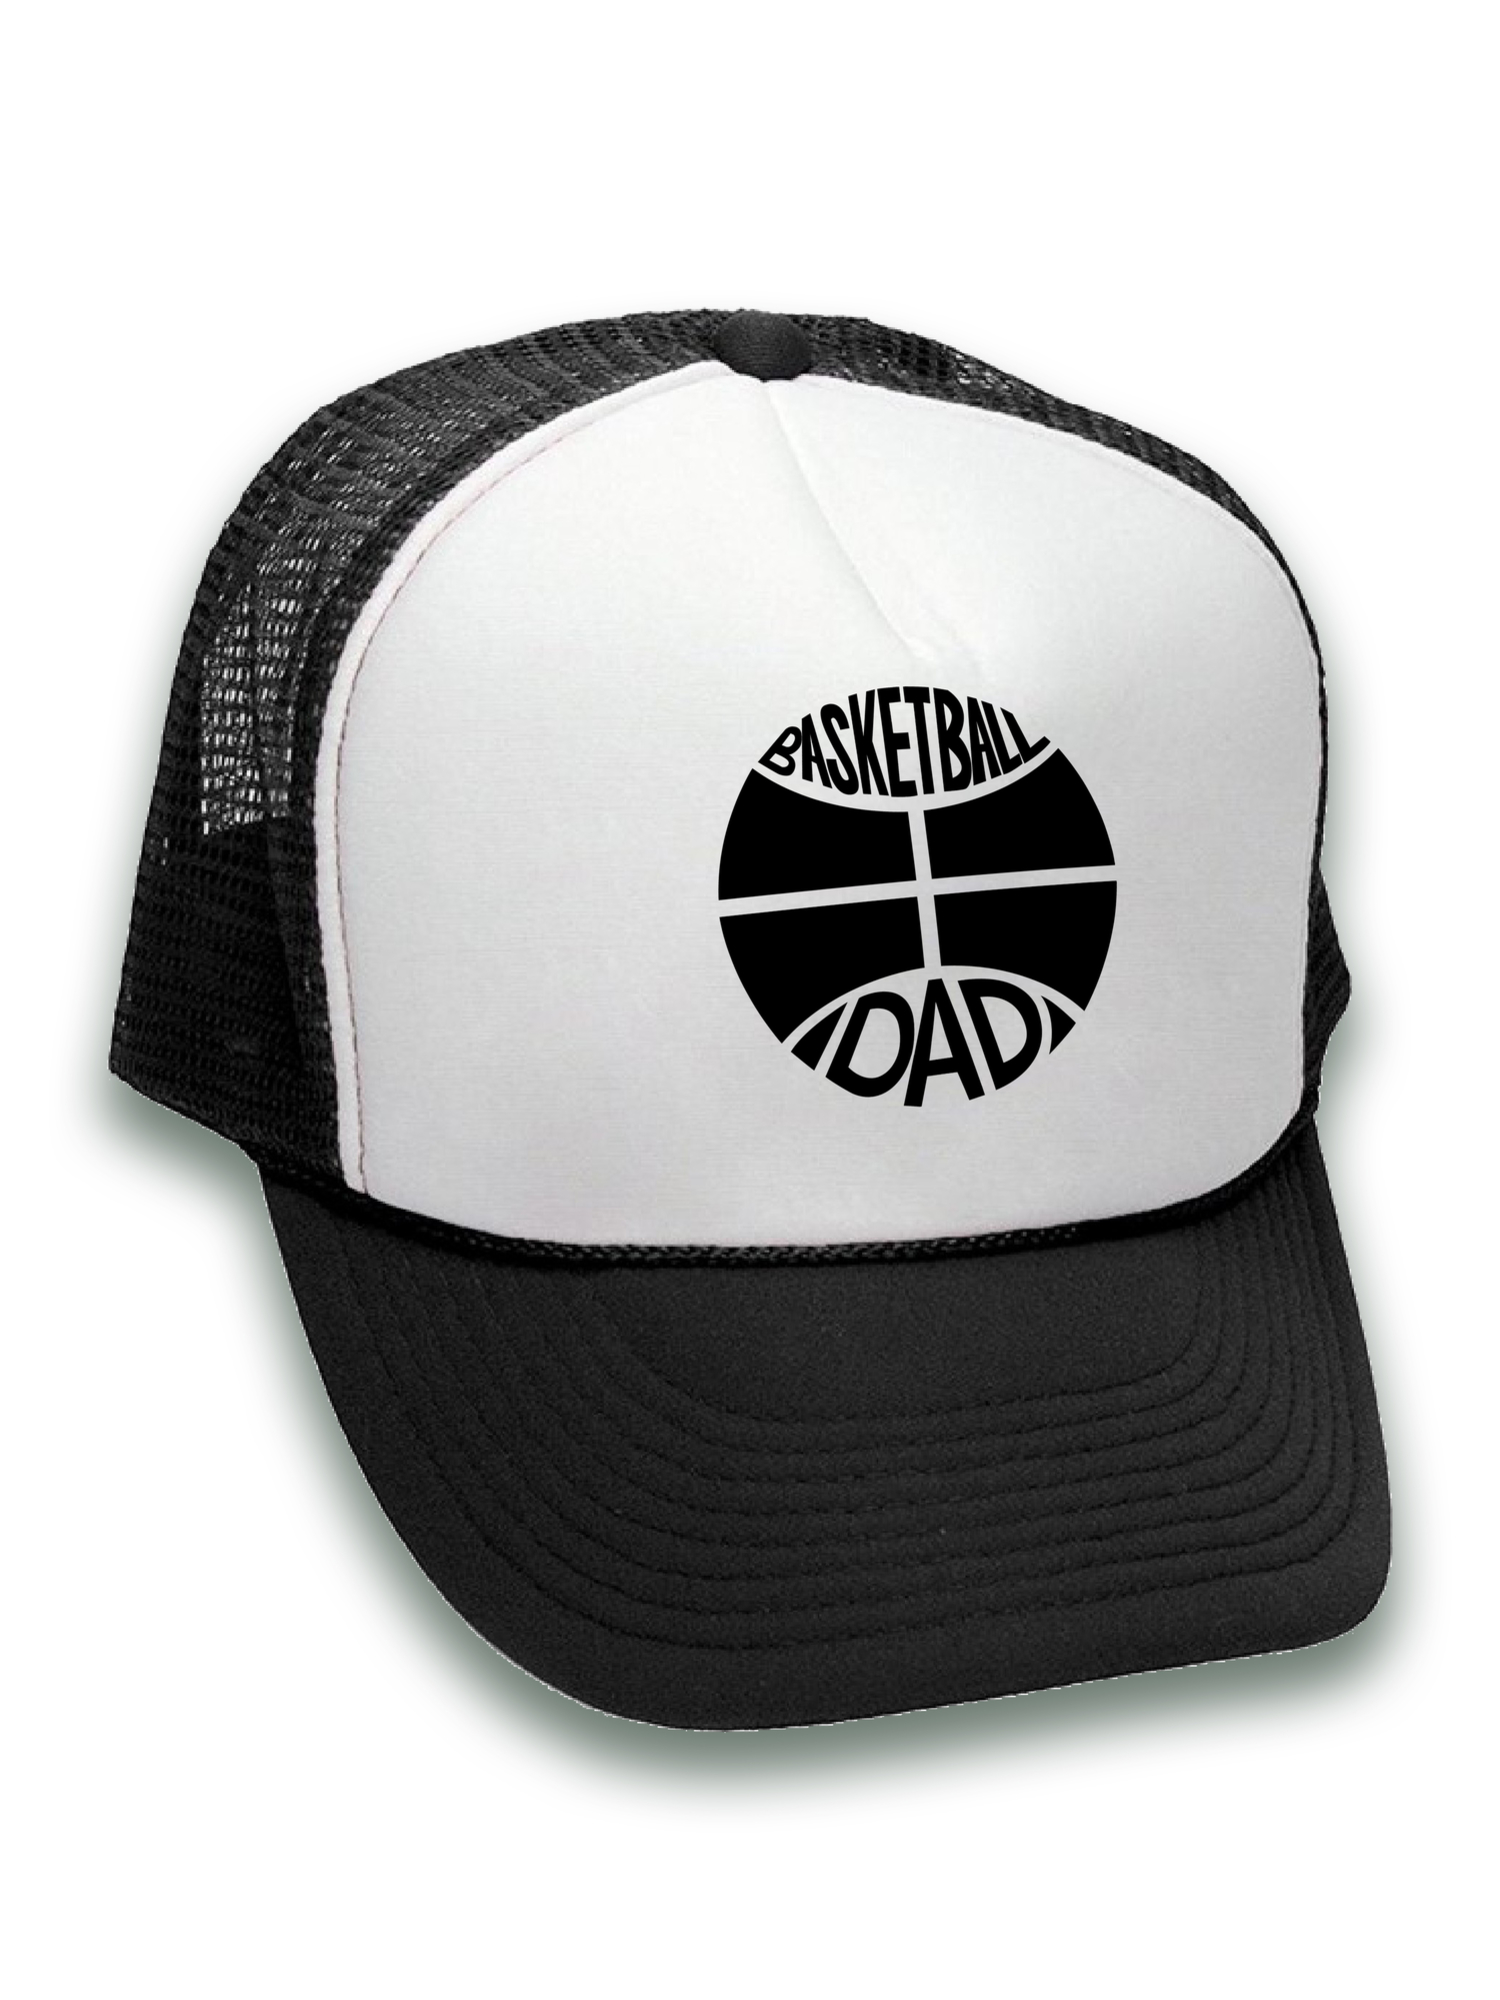 Awkward Styles Volleyball Dad Trucker Hat Volleyball Hat for Dad Volleyball Gifts Father's Day Trucker Hats Sports Dad Snapback Hat Volleyball Fans Cheer Dad Trucker Hat Cool Sports Gifts for Dad - image 2 of 6